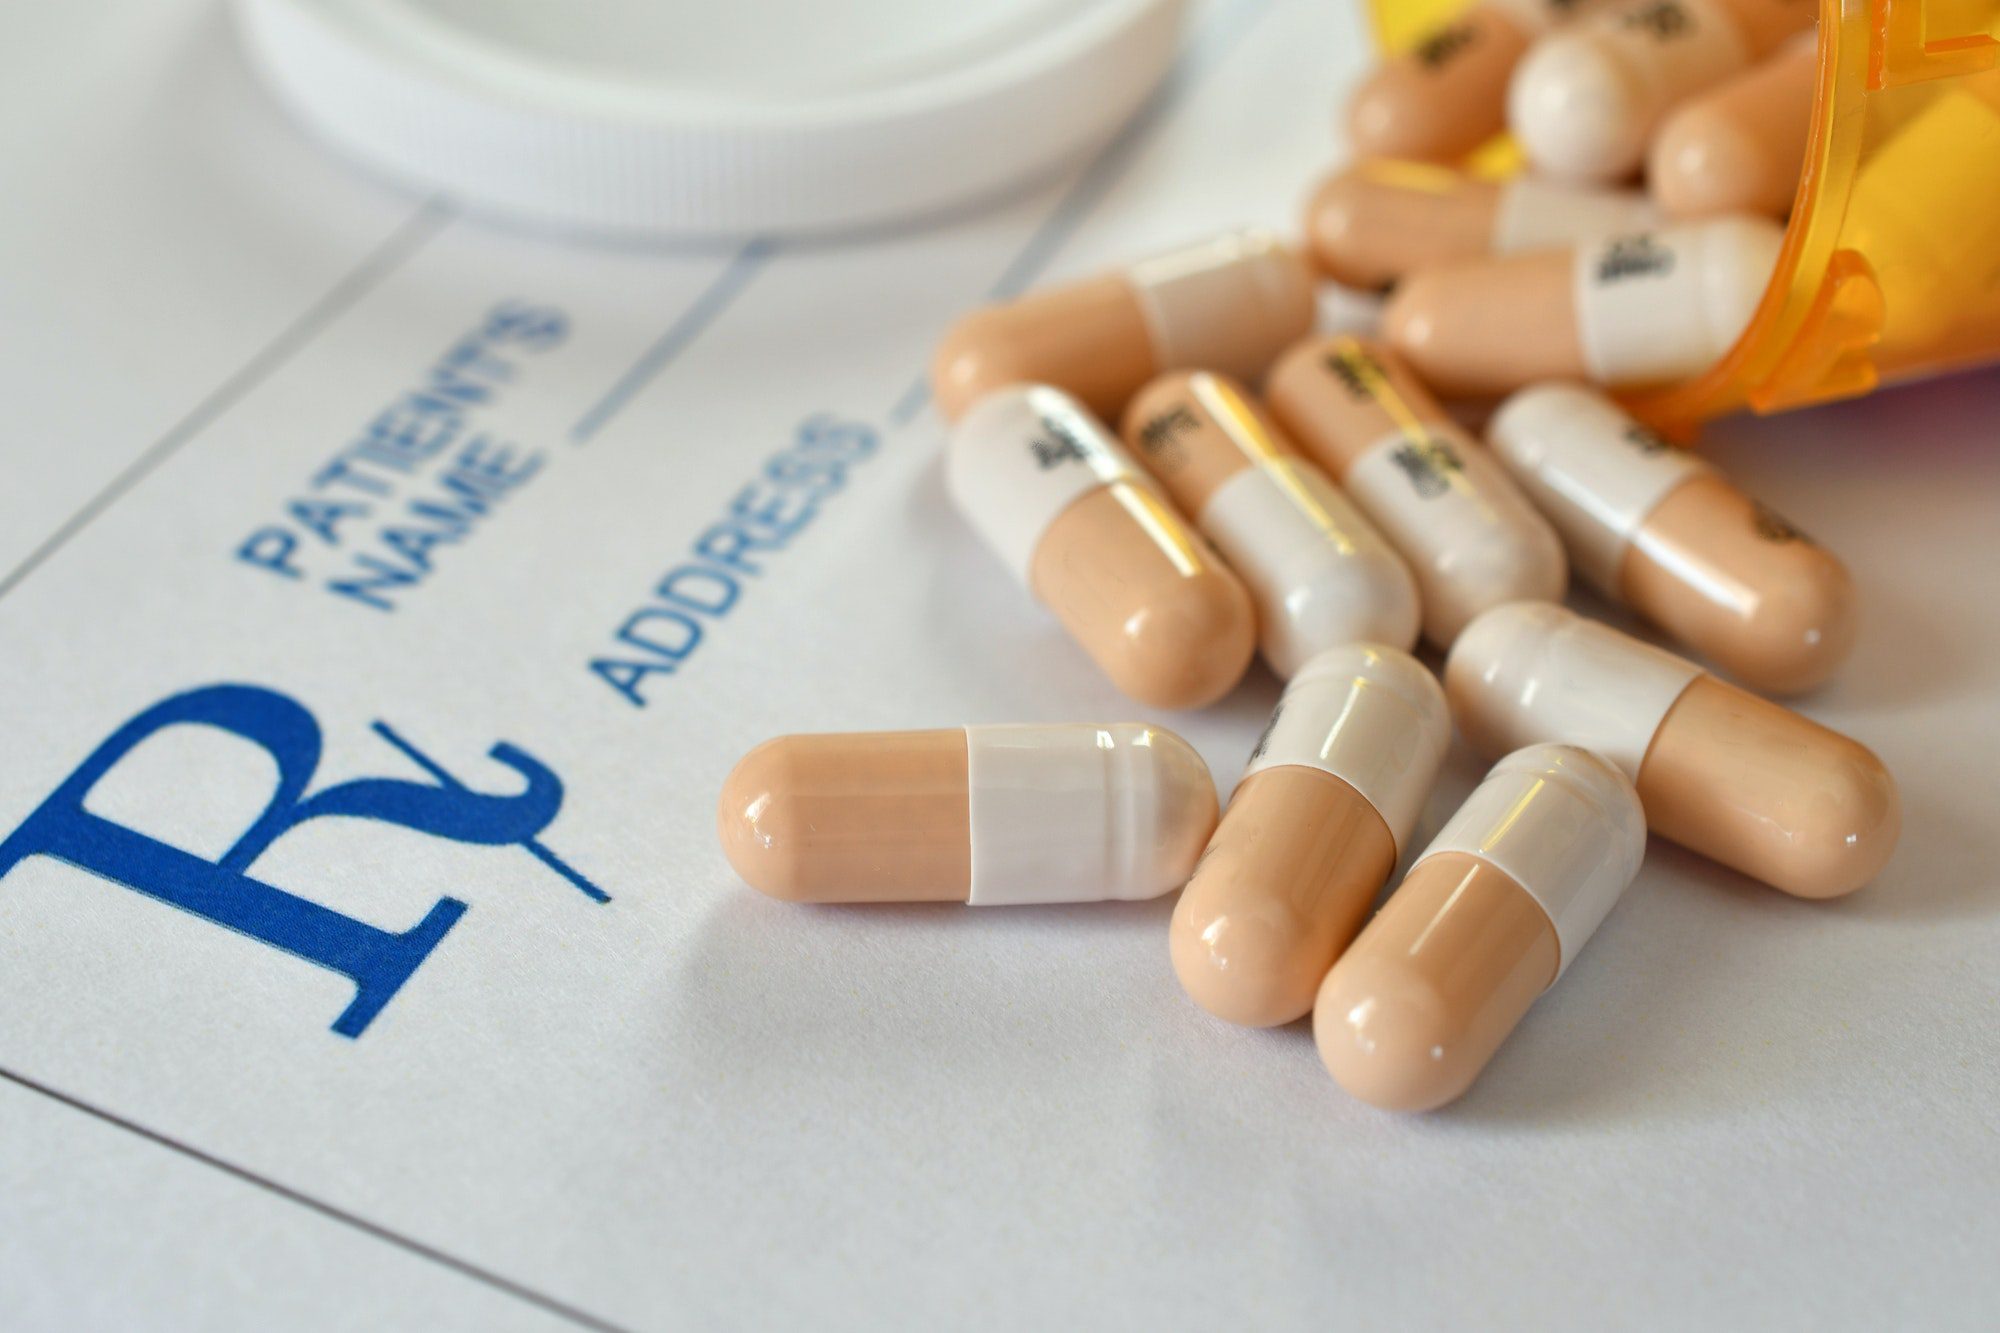 Pills, medicine, and pharmaceutical drugs laying on a Prescription Drug Coverage RX pad.